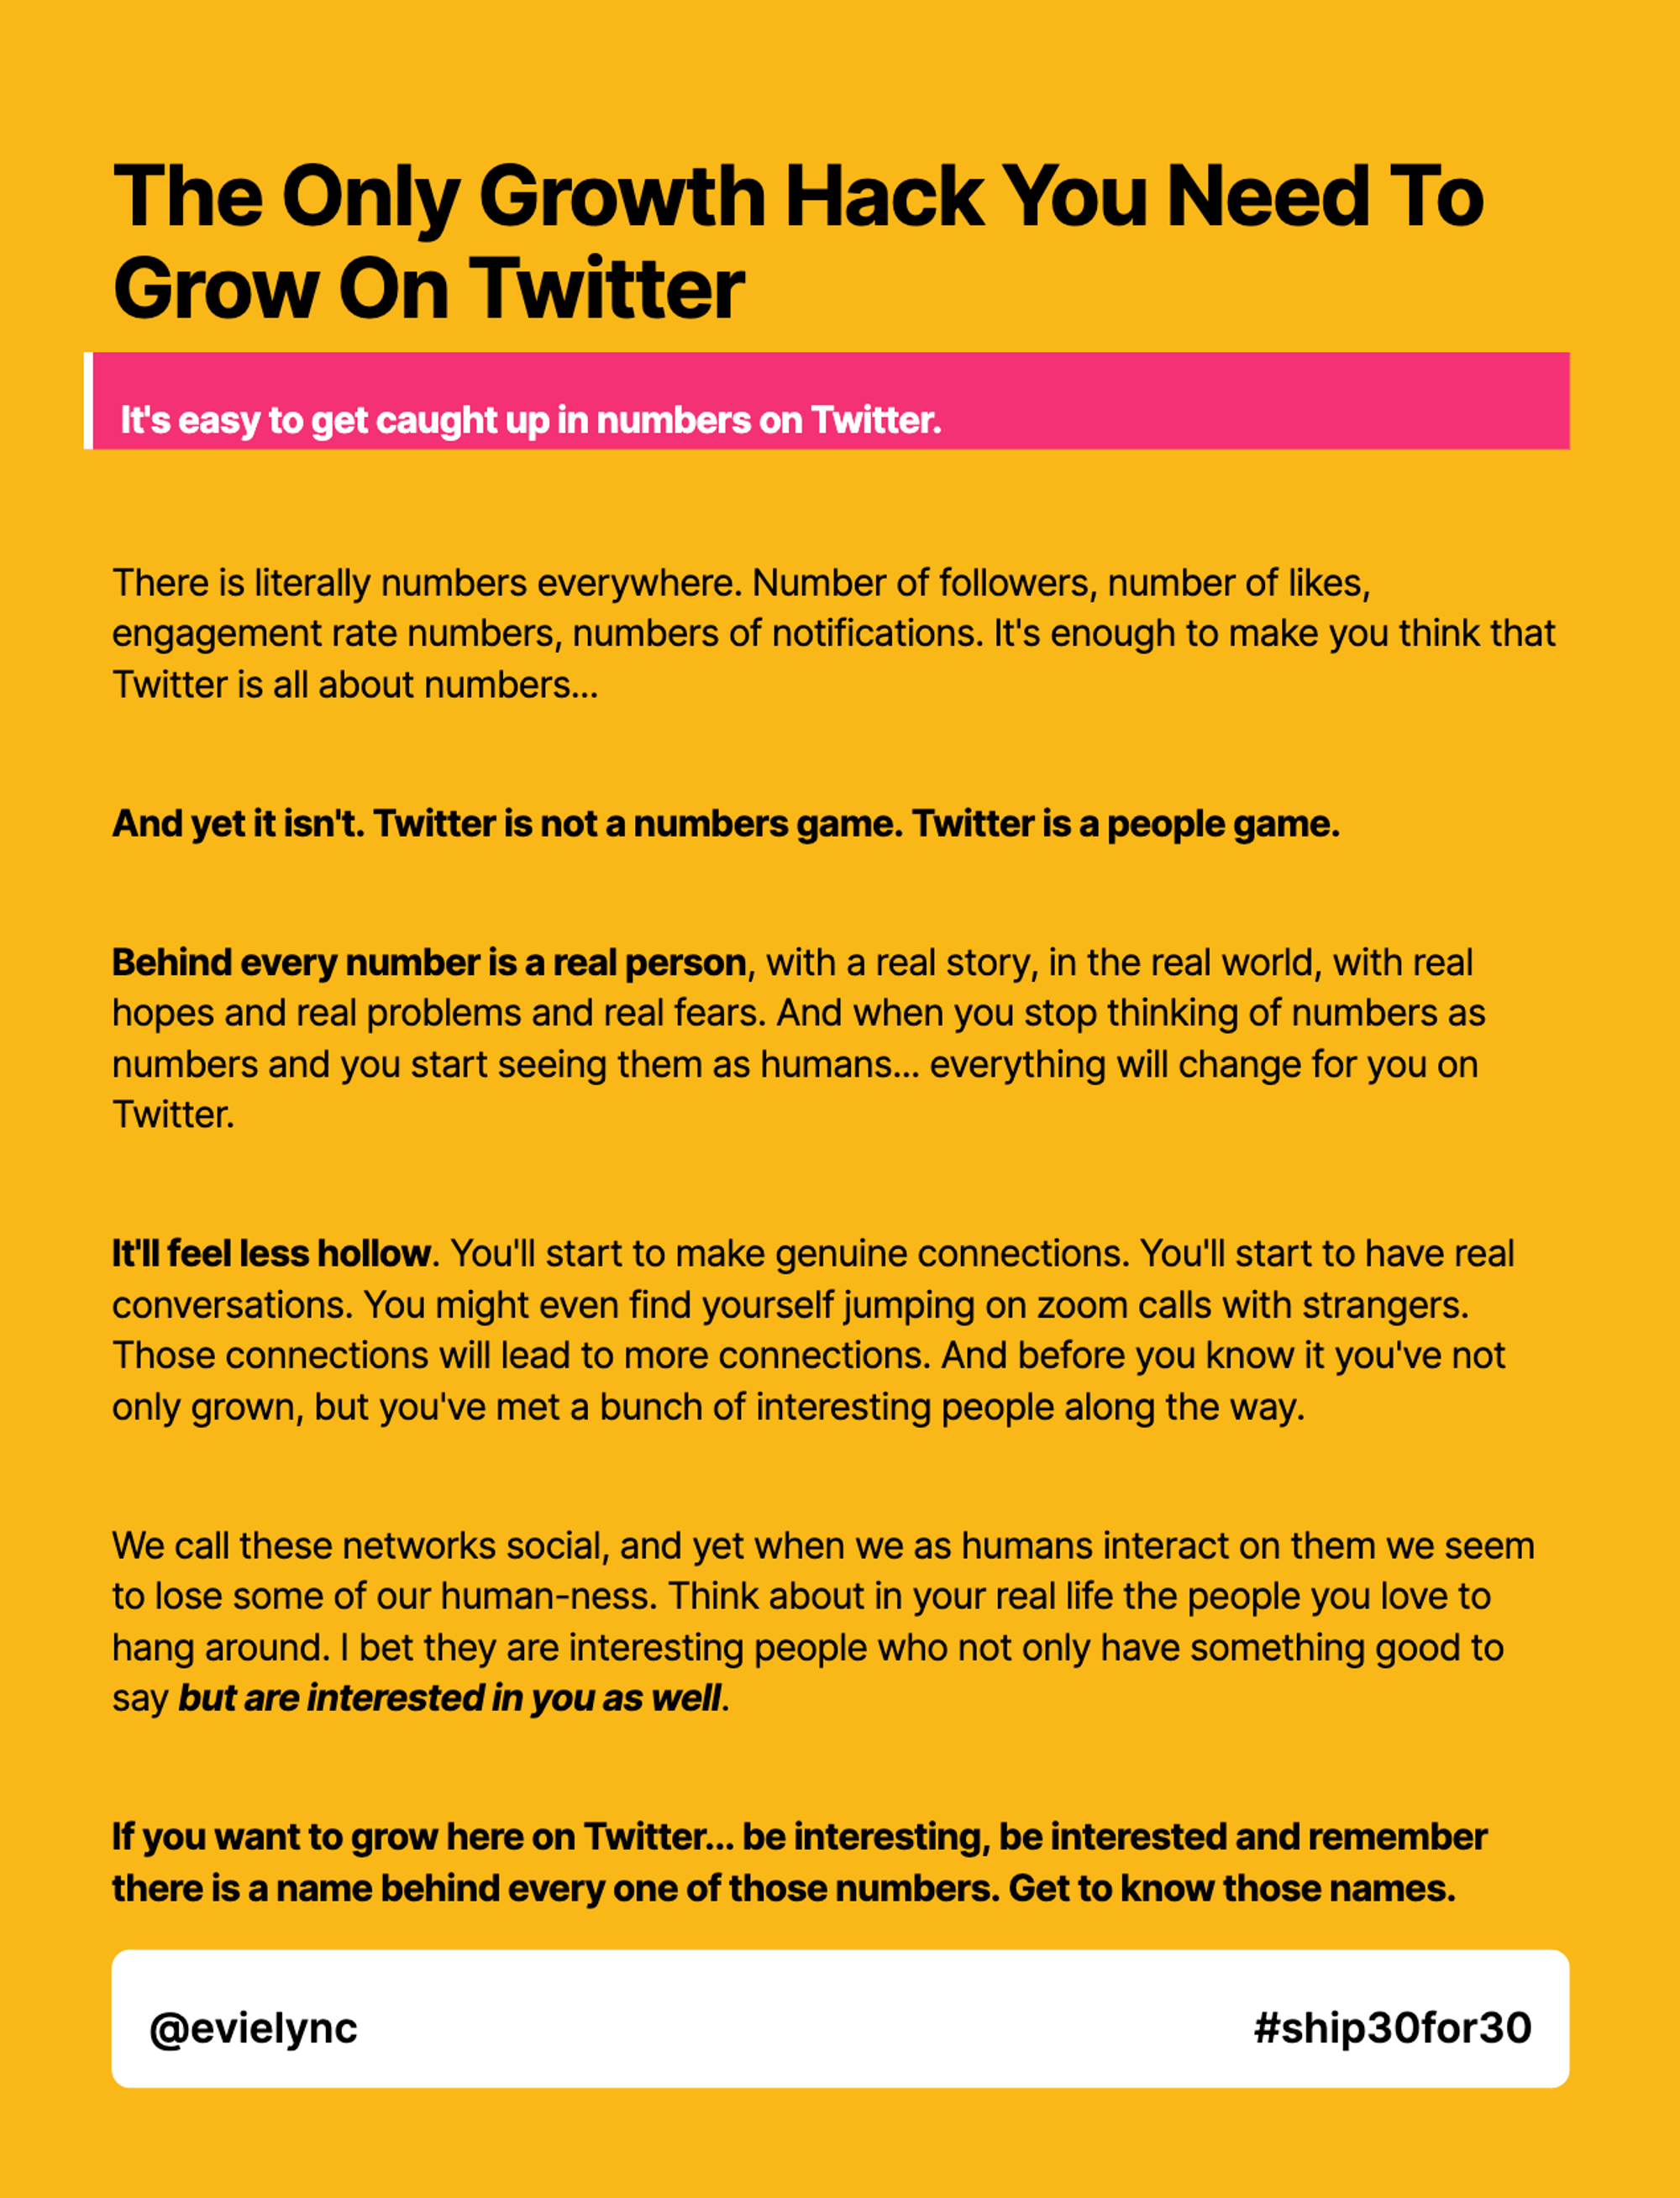 The Only Growth Hack You Need To Grow On Twitter